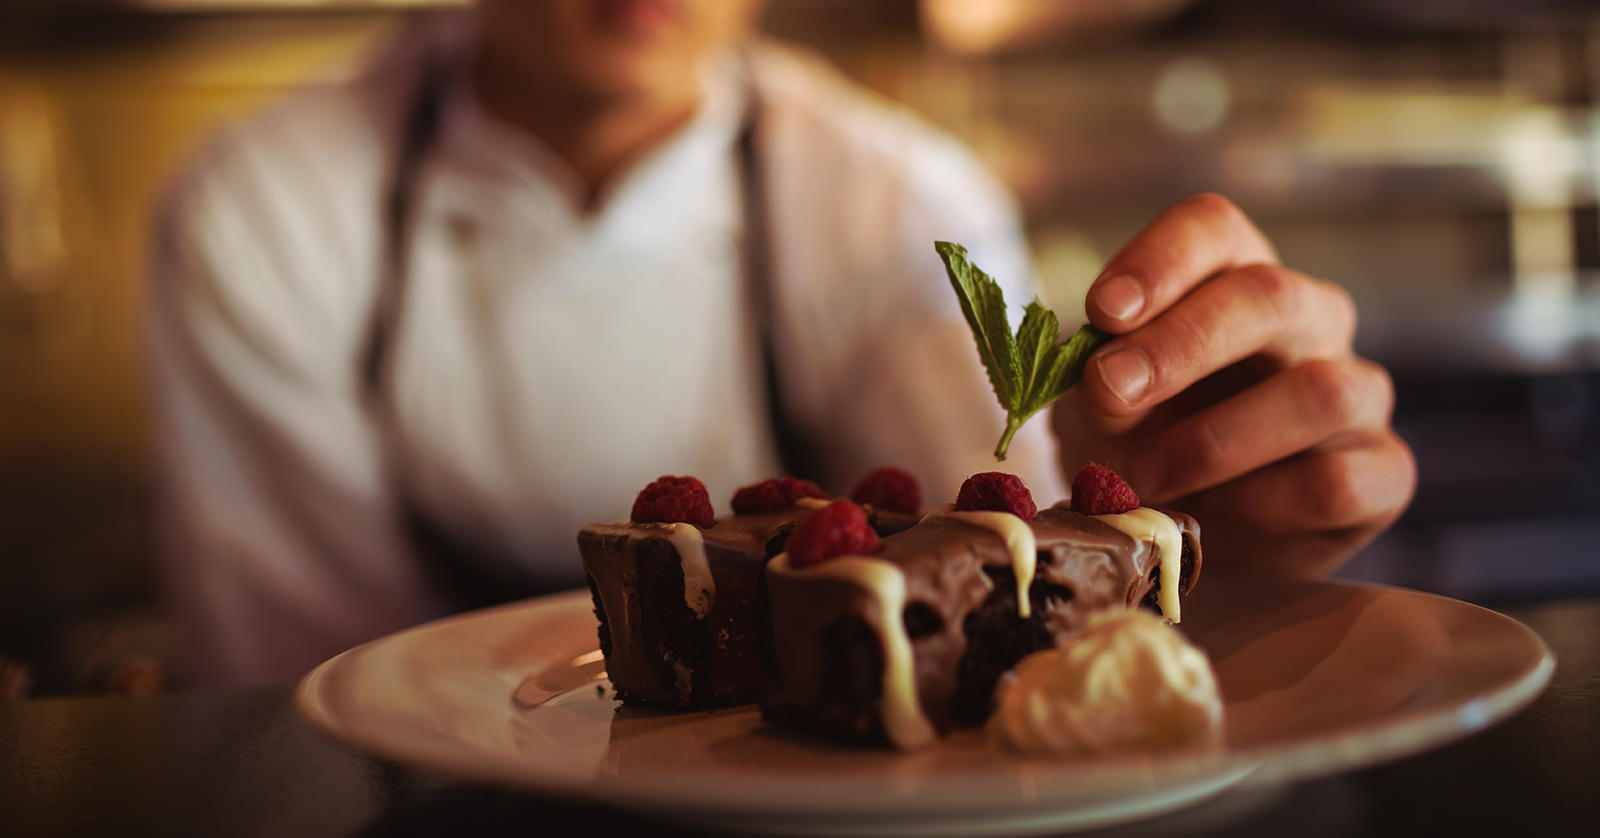 Close-up of male chef garnishing dessert plate in commercial kitchen